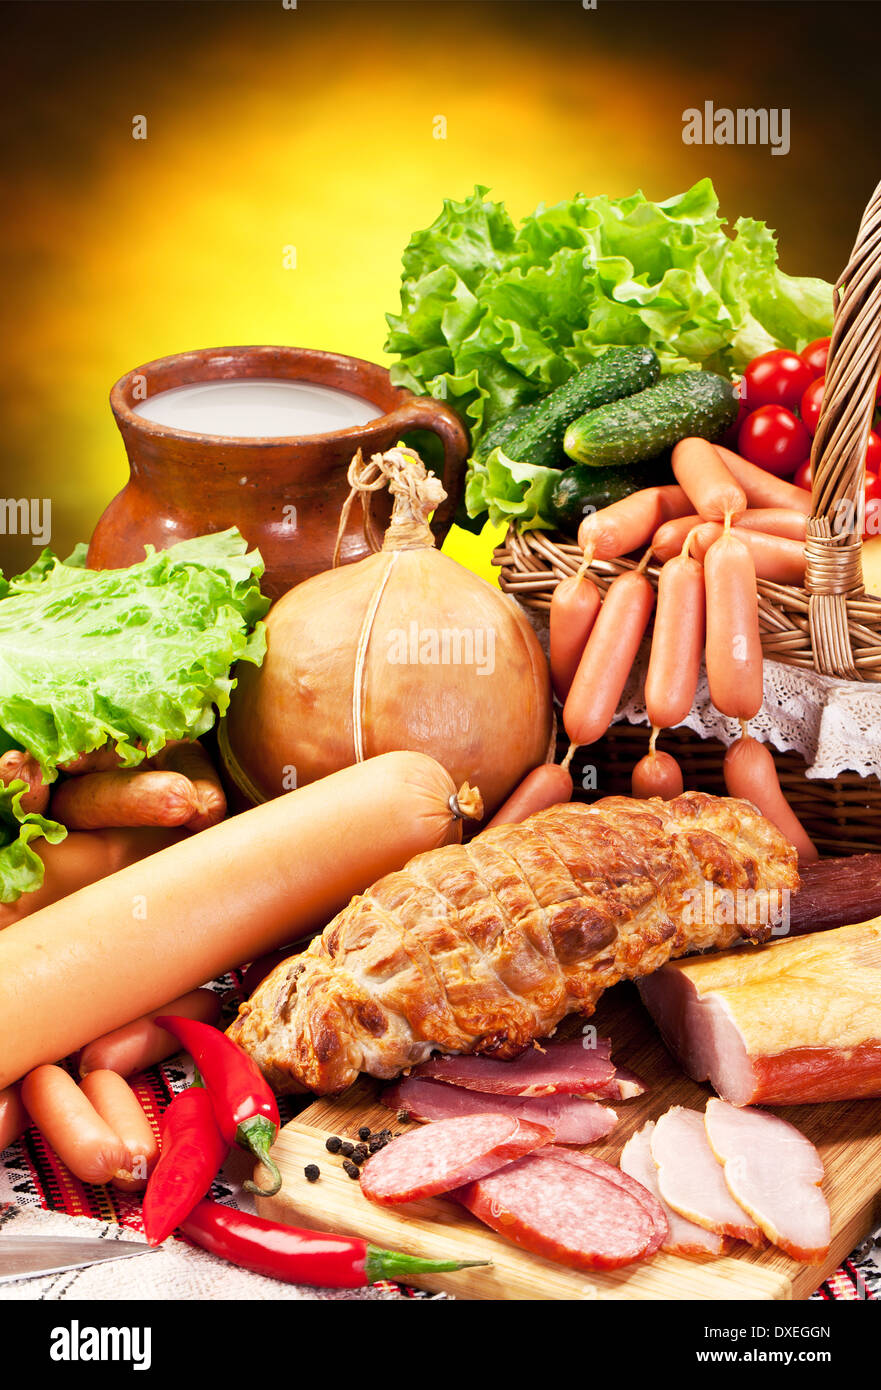 Variety of sausage products. Close-up shot. Stock Photo